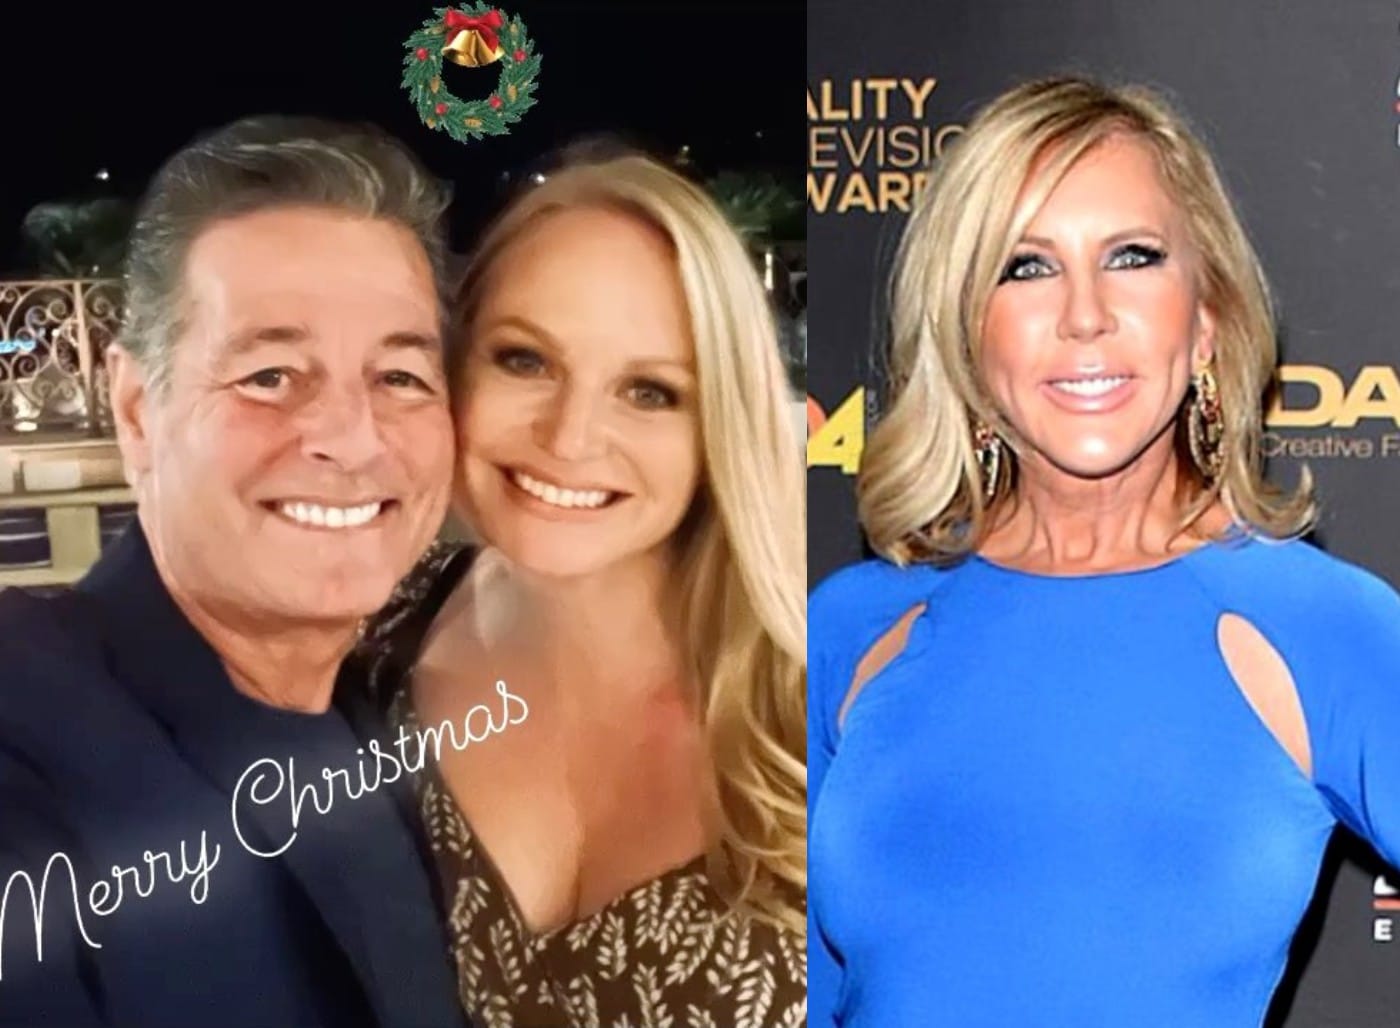 Steve Lodge, 63, Has a New Fiancé, Janis Carlson, 37, Just Months After Breakup With RHOC Alum Vicki Gunvalson